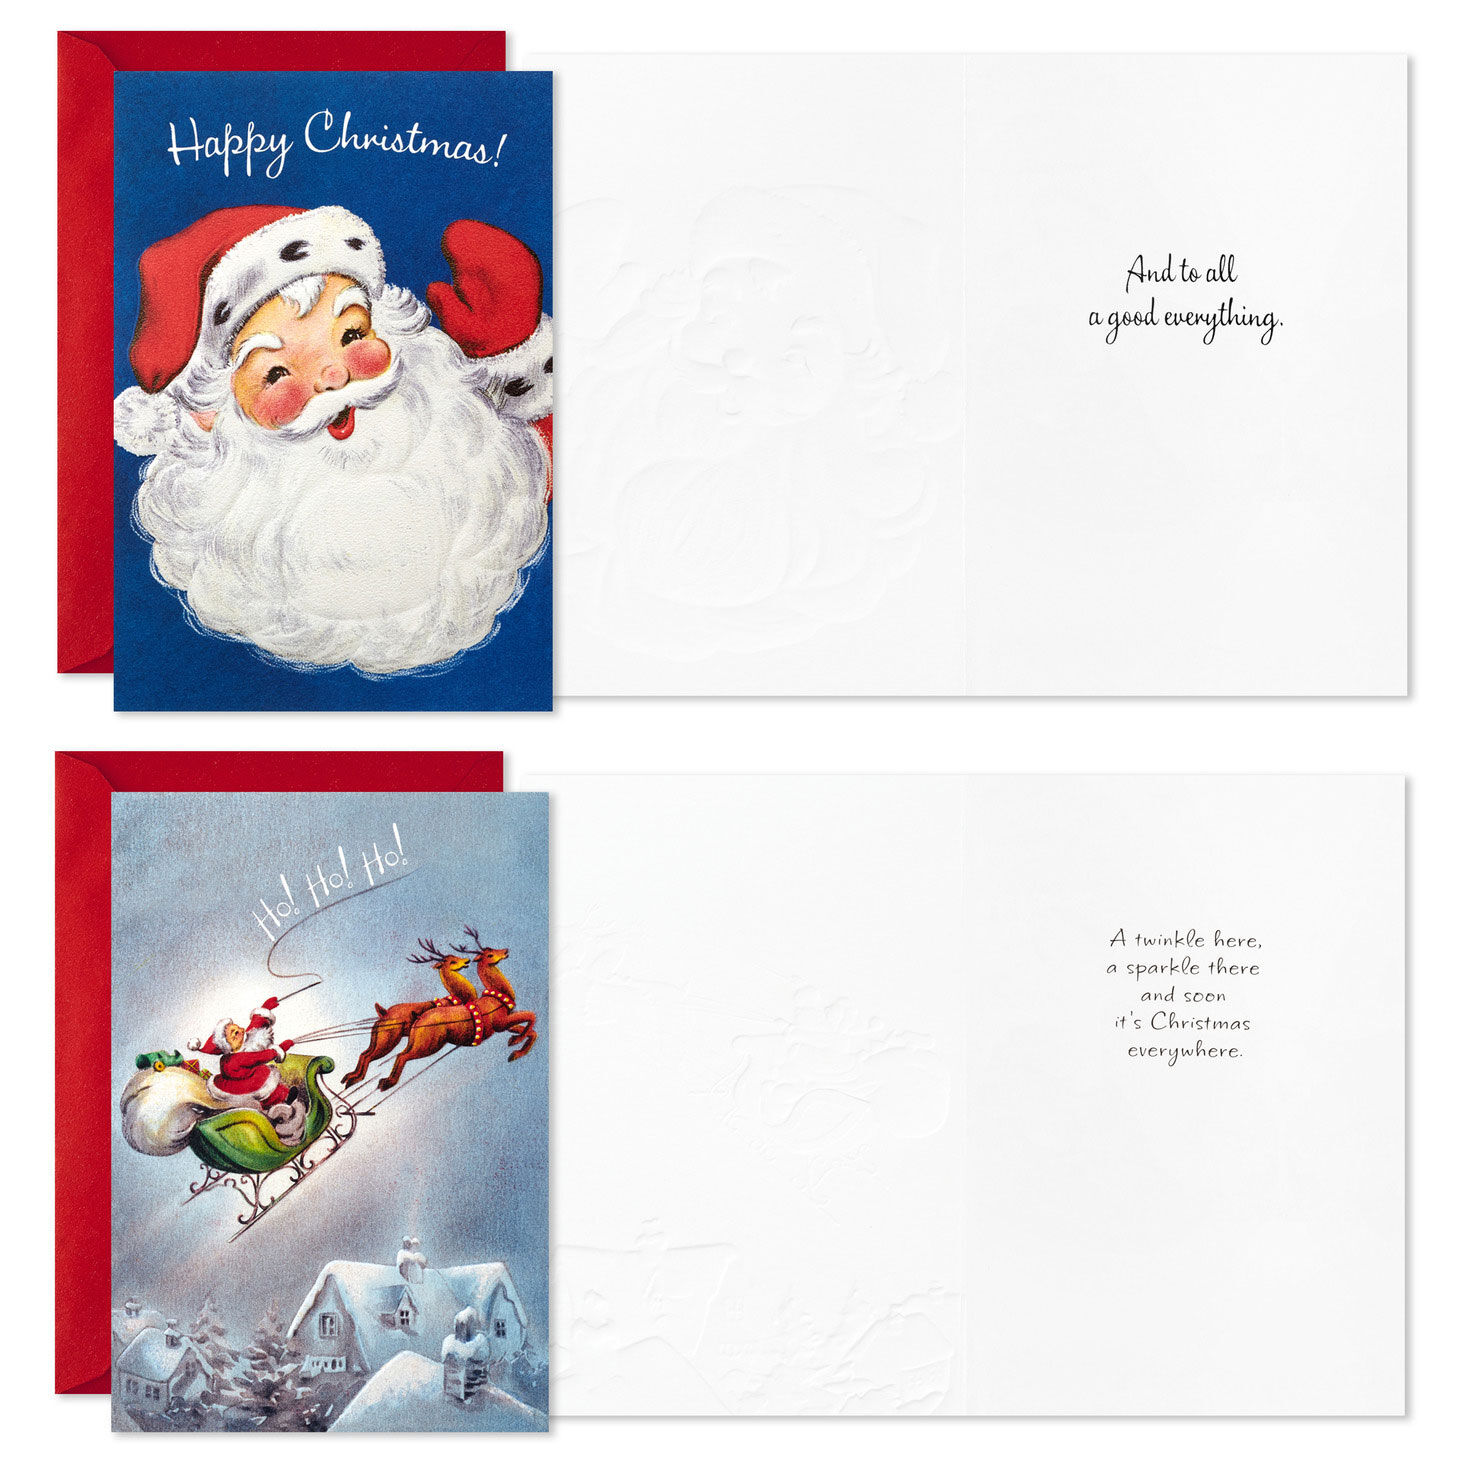 100 Individual Christmas Card Assortment CLOSEOUT Send or Crafts NICE NEW CARDS! 